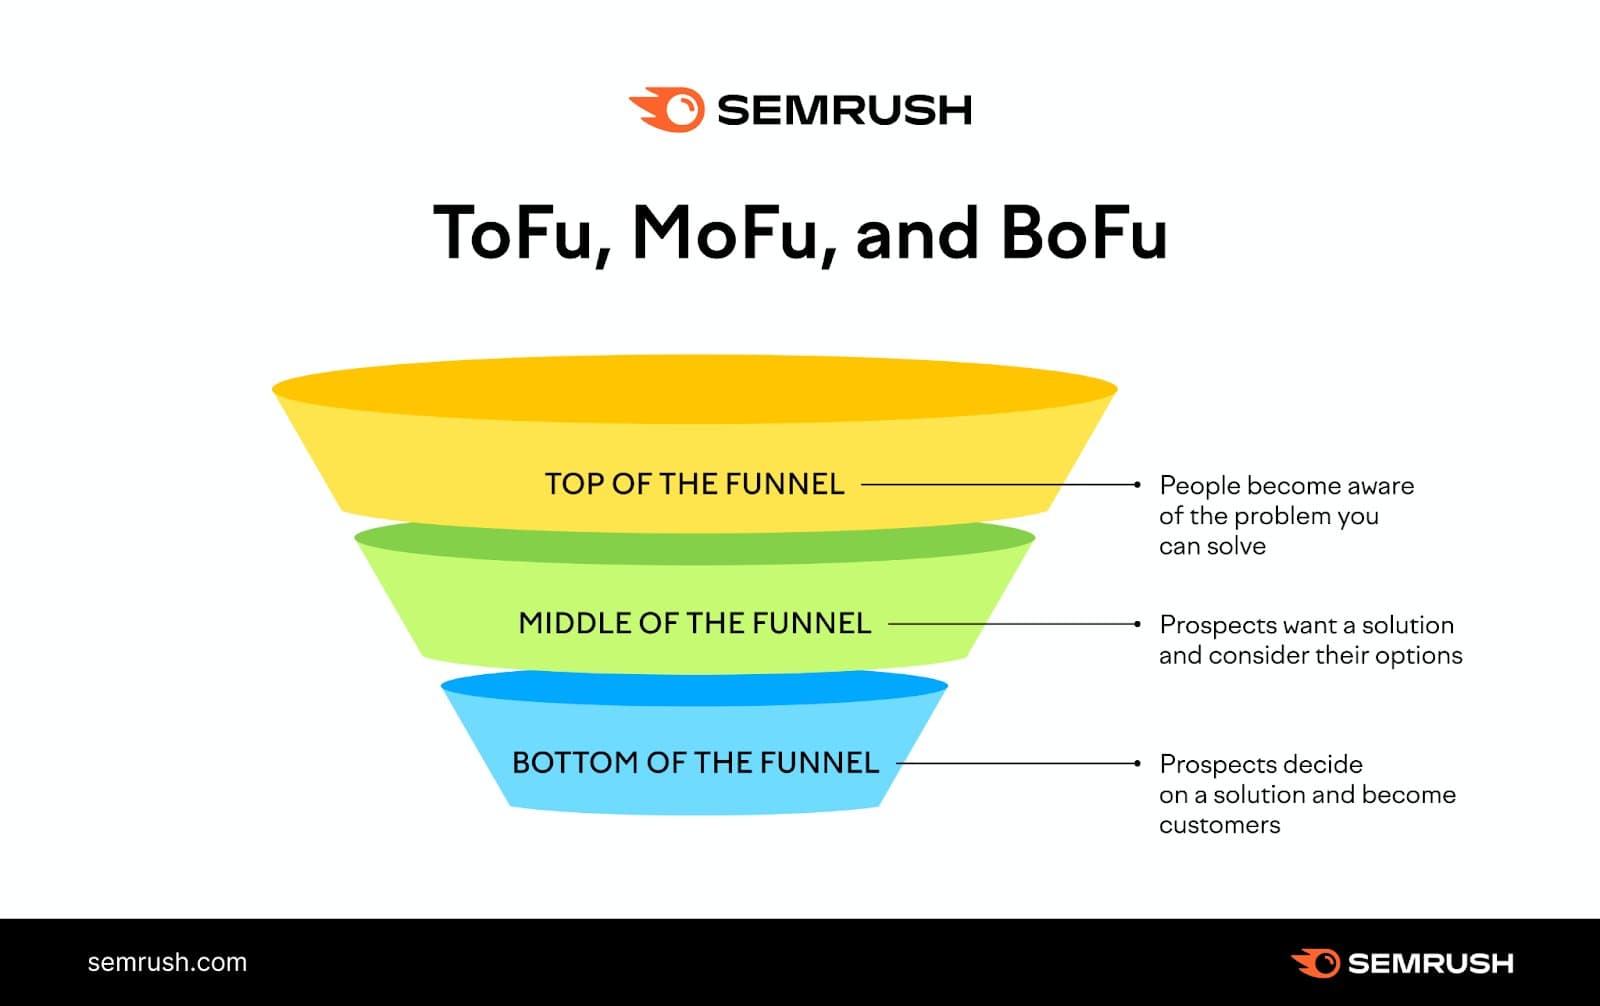 An infographic of a marketing funnel, with "ToFu," "MoFu," and "BoFu" stages